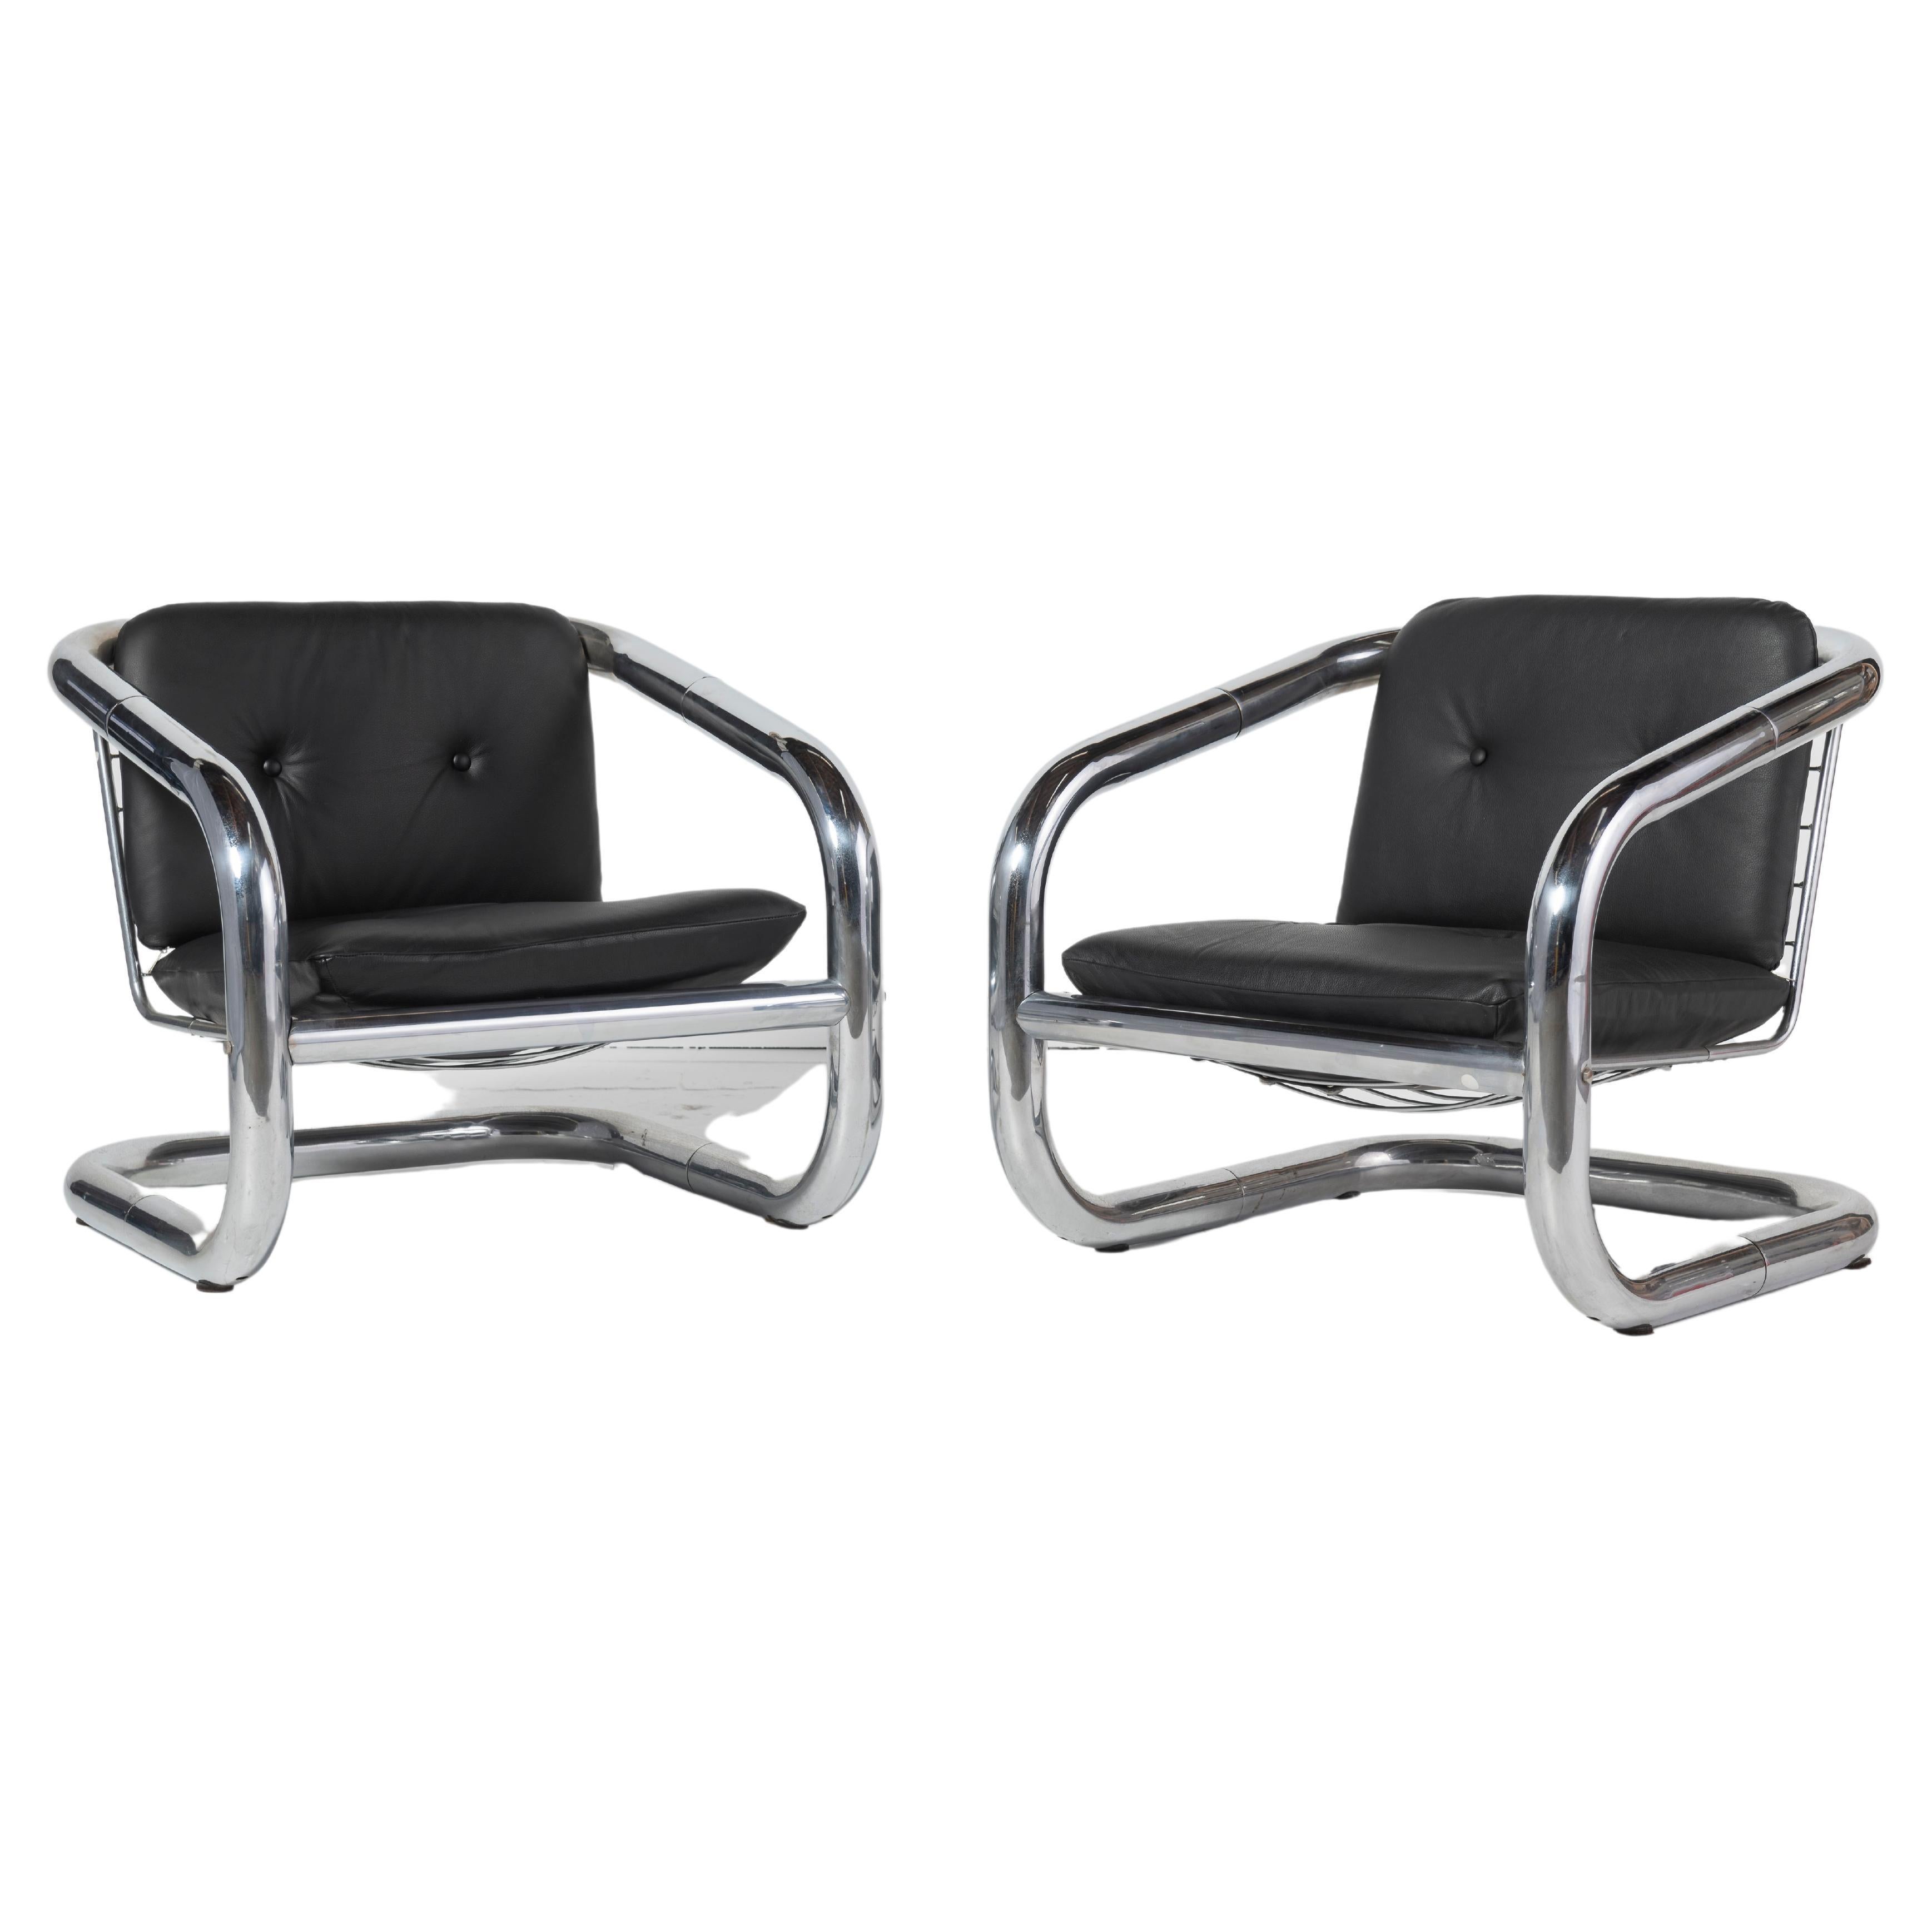 Pair of Chrome and Leather Armchairs by L'Atelier San Paulo